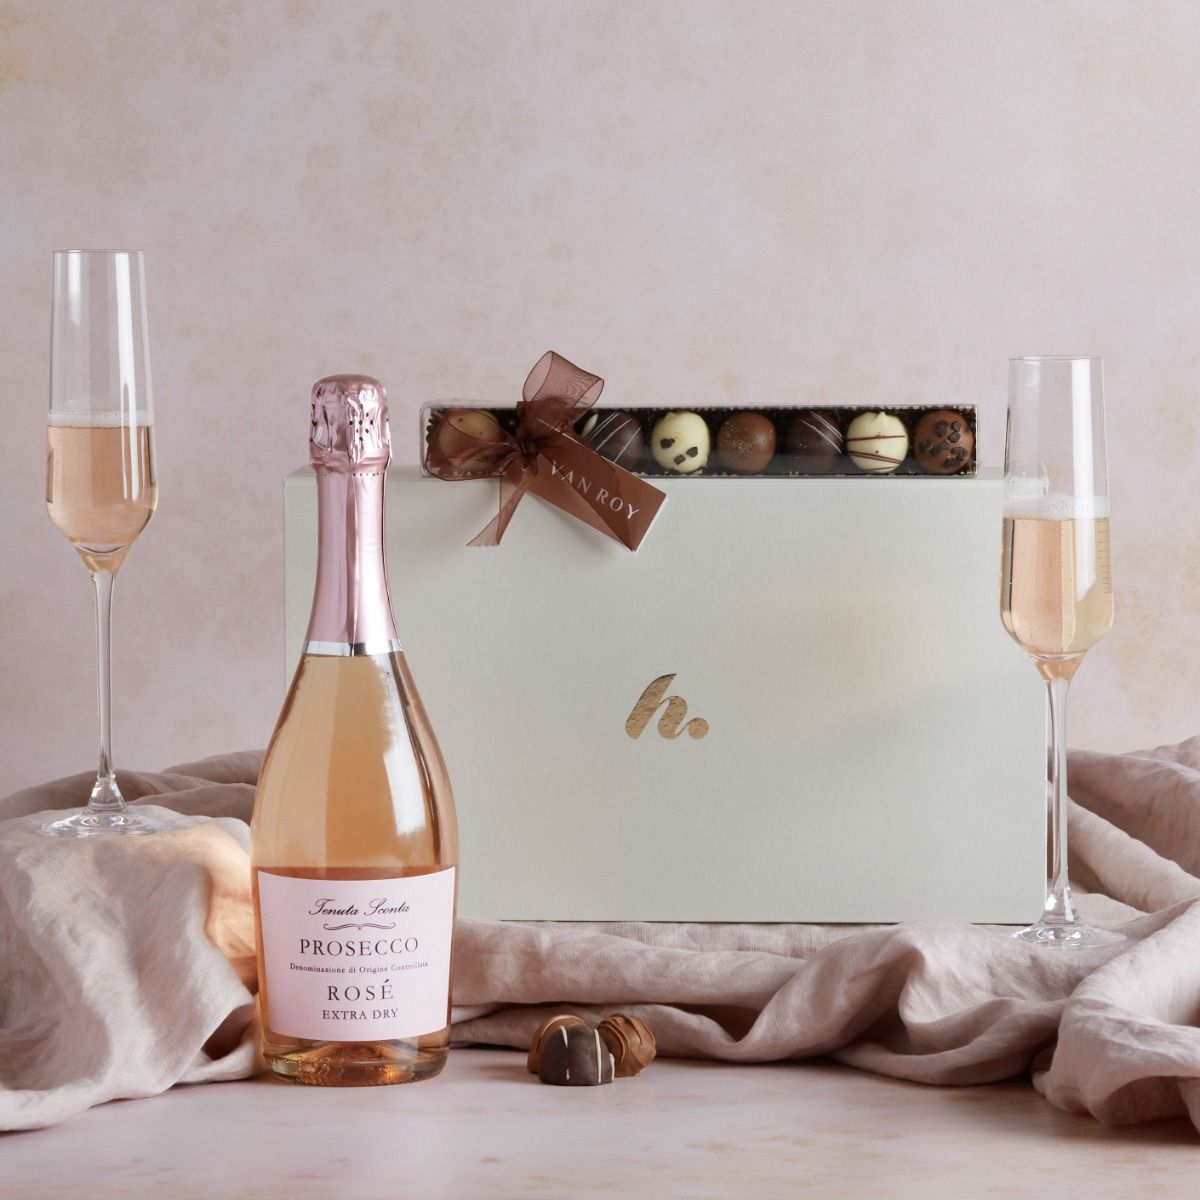 Prosecco Rosé & Truffles Hamper with contents on display